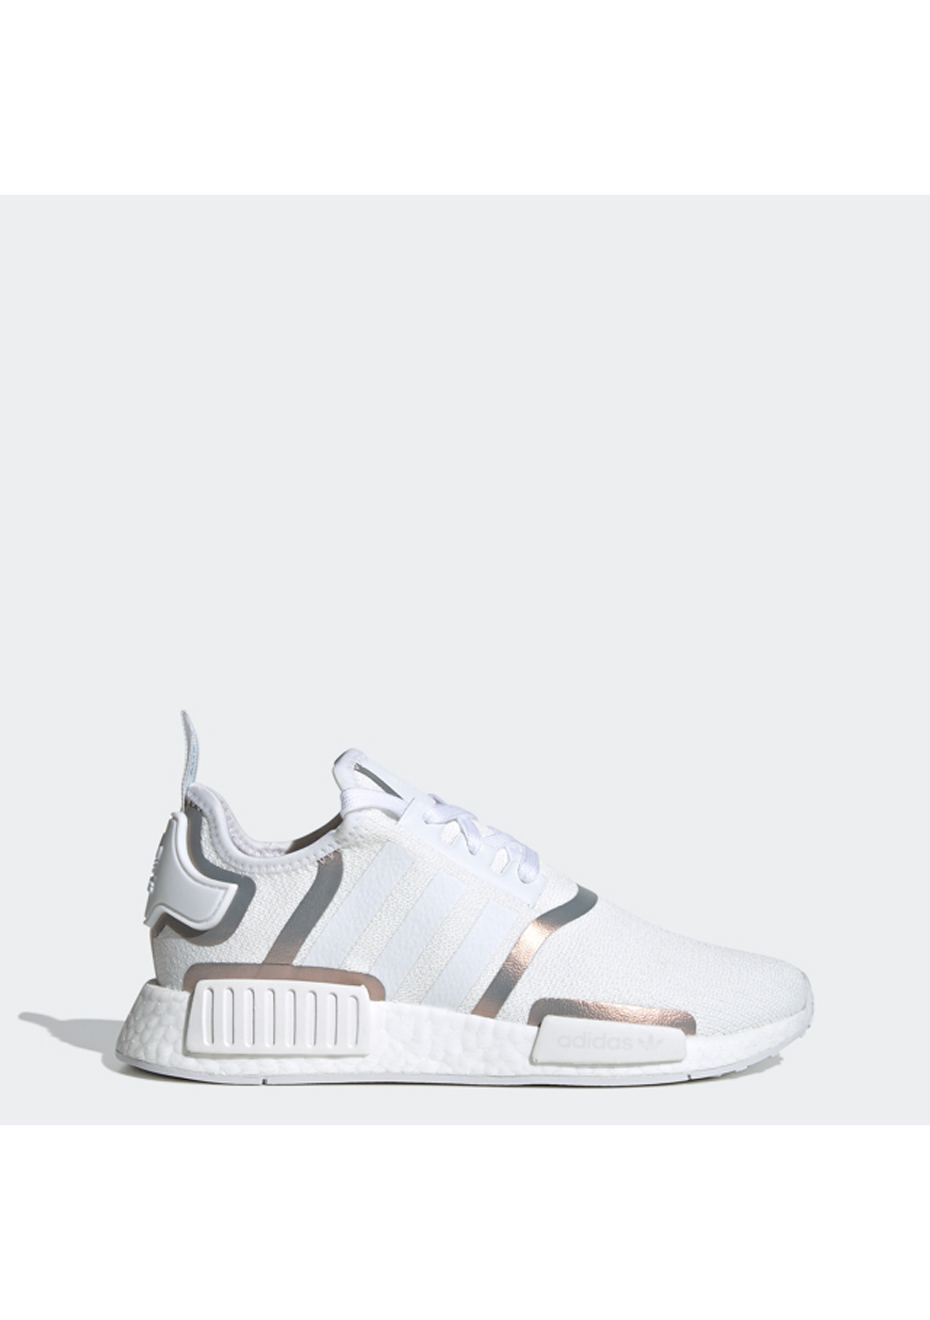 nmd_r1 shoes black and white